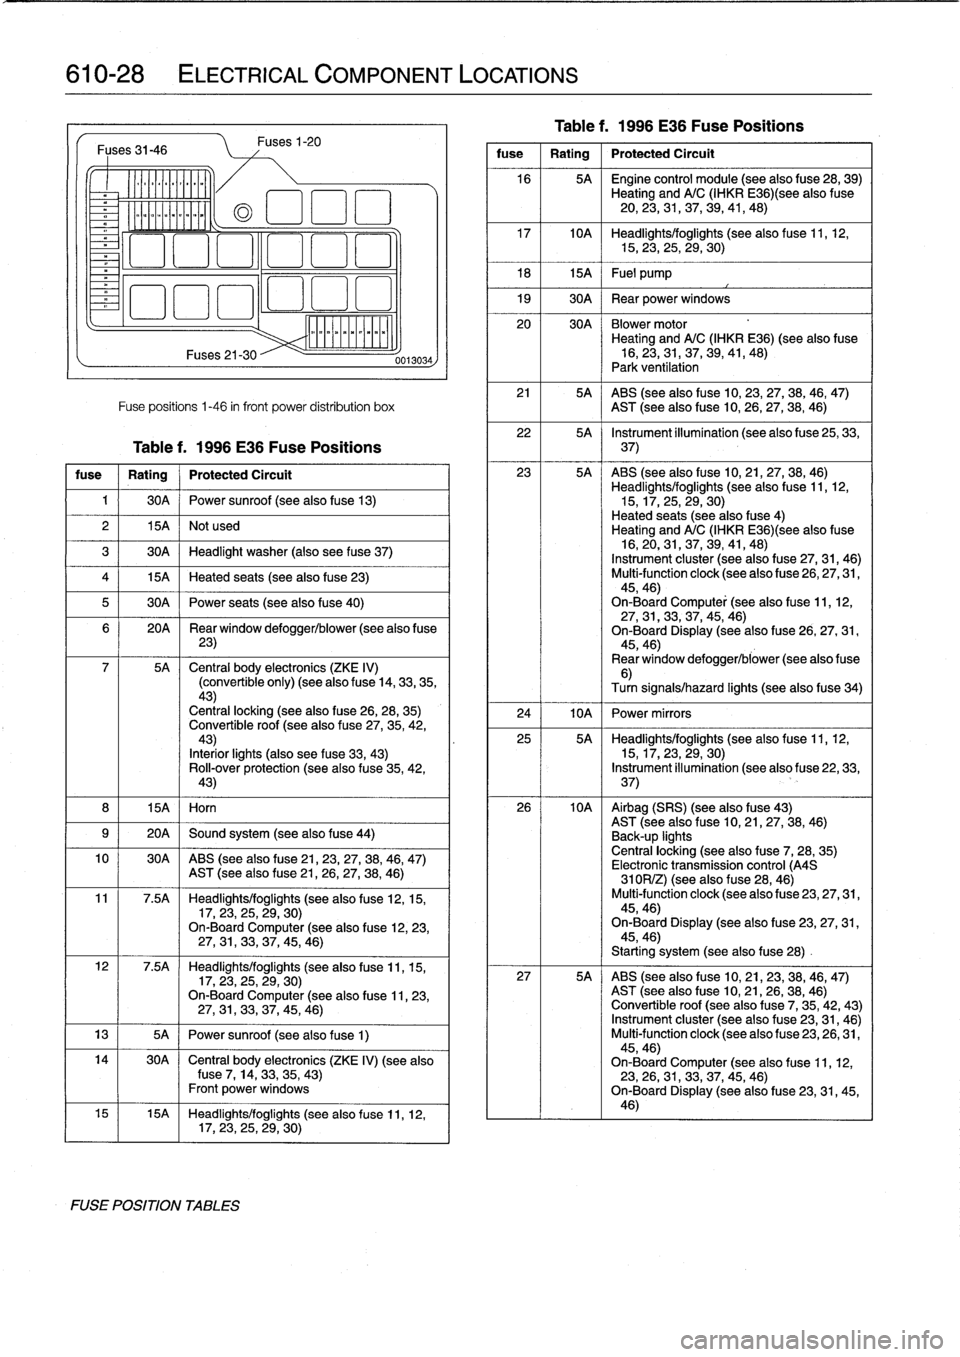 BMW M3 1998 E36 User Guide 
610-28

	

ELECTRICAL
COMPONENT
LOCATIONS

Fuses
31-46

k
Lírcoo)]
LE

7a
Maz

Fuses
21-30

Fuse
positions
1-46
in
front
power
distribution
box
Table
f
.
1996
E36
Fuse
Positions

fuse

	

Rating

	
